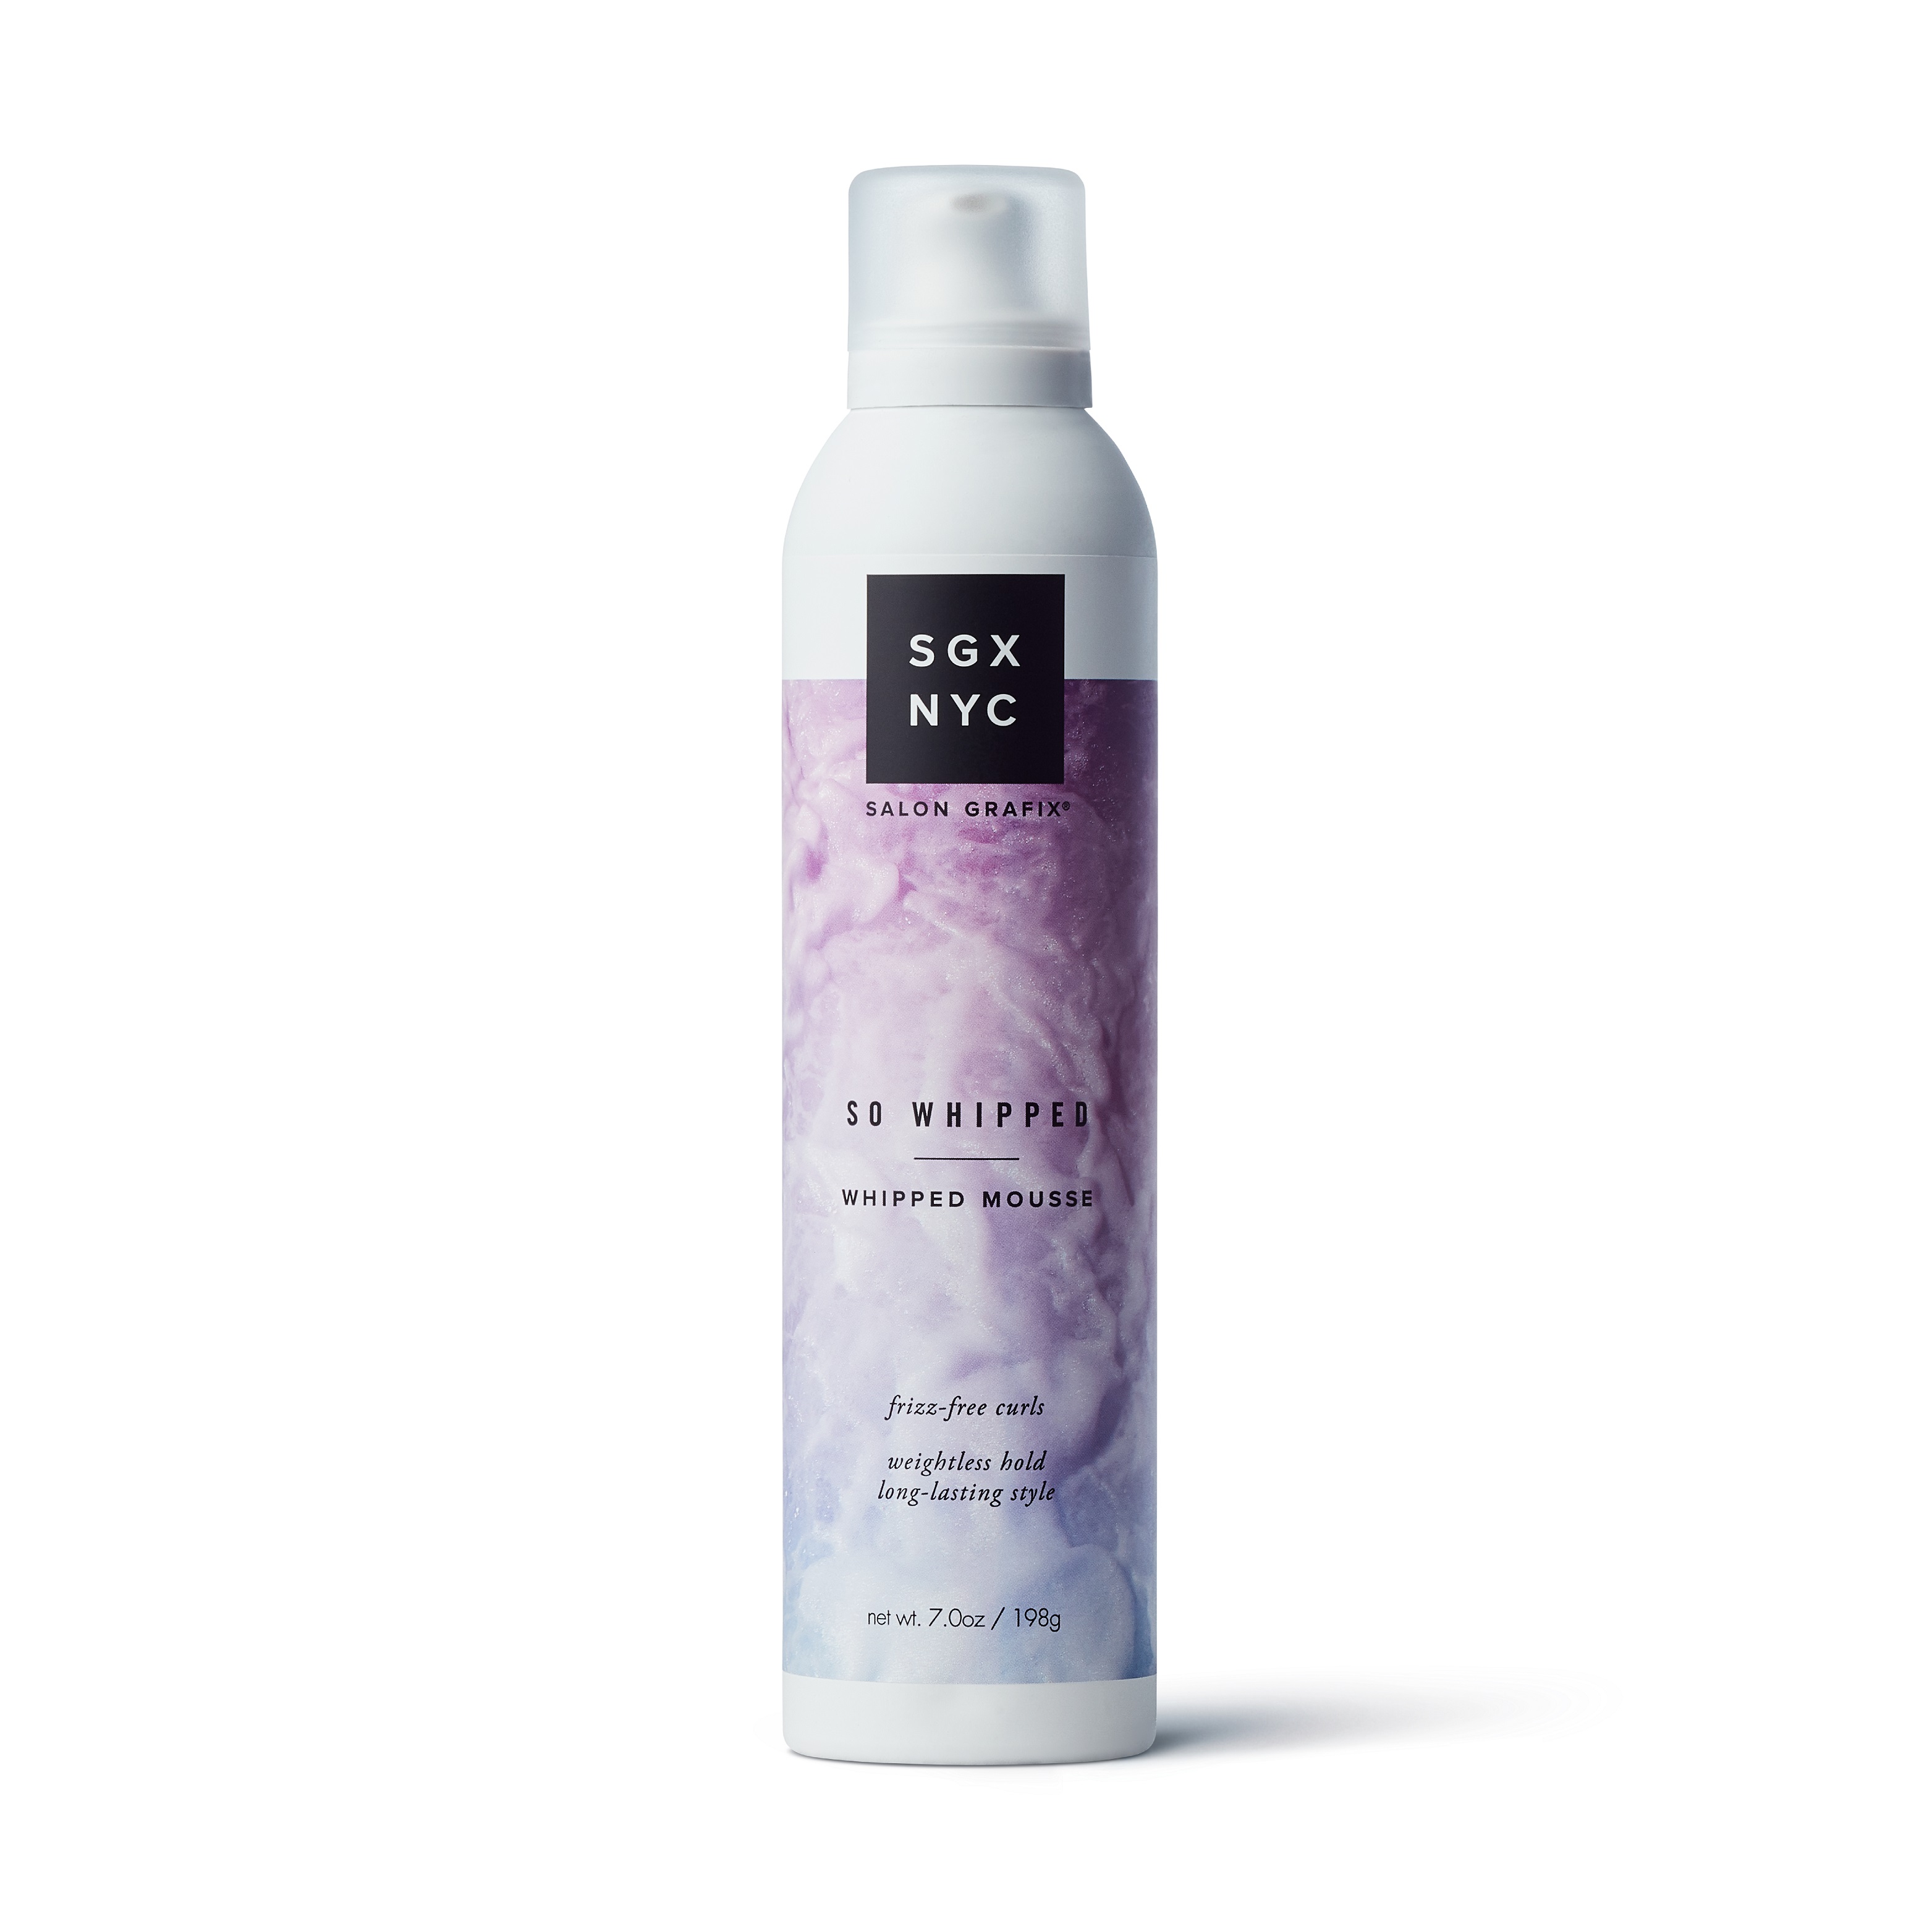 SGX NYC So Whipped Mousse For Nonstop Curls And Waves - image 1 of 6